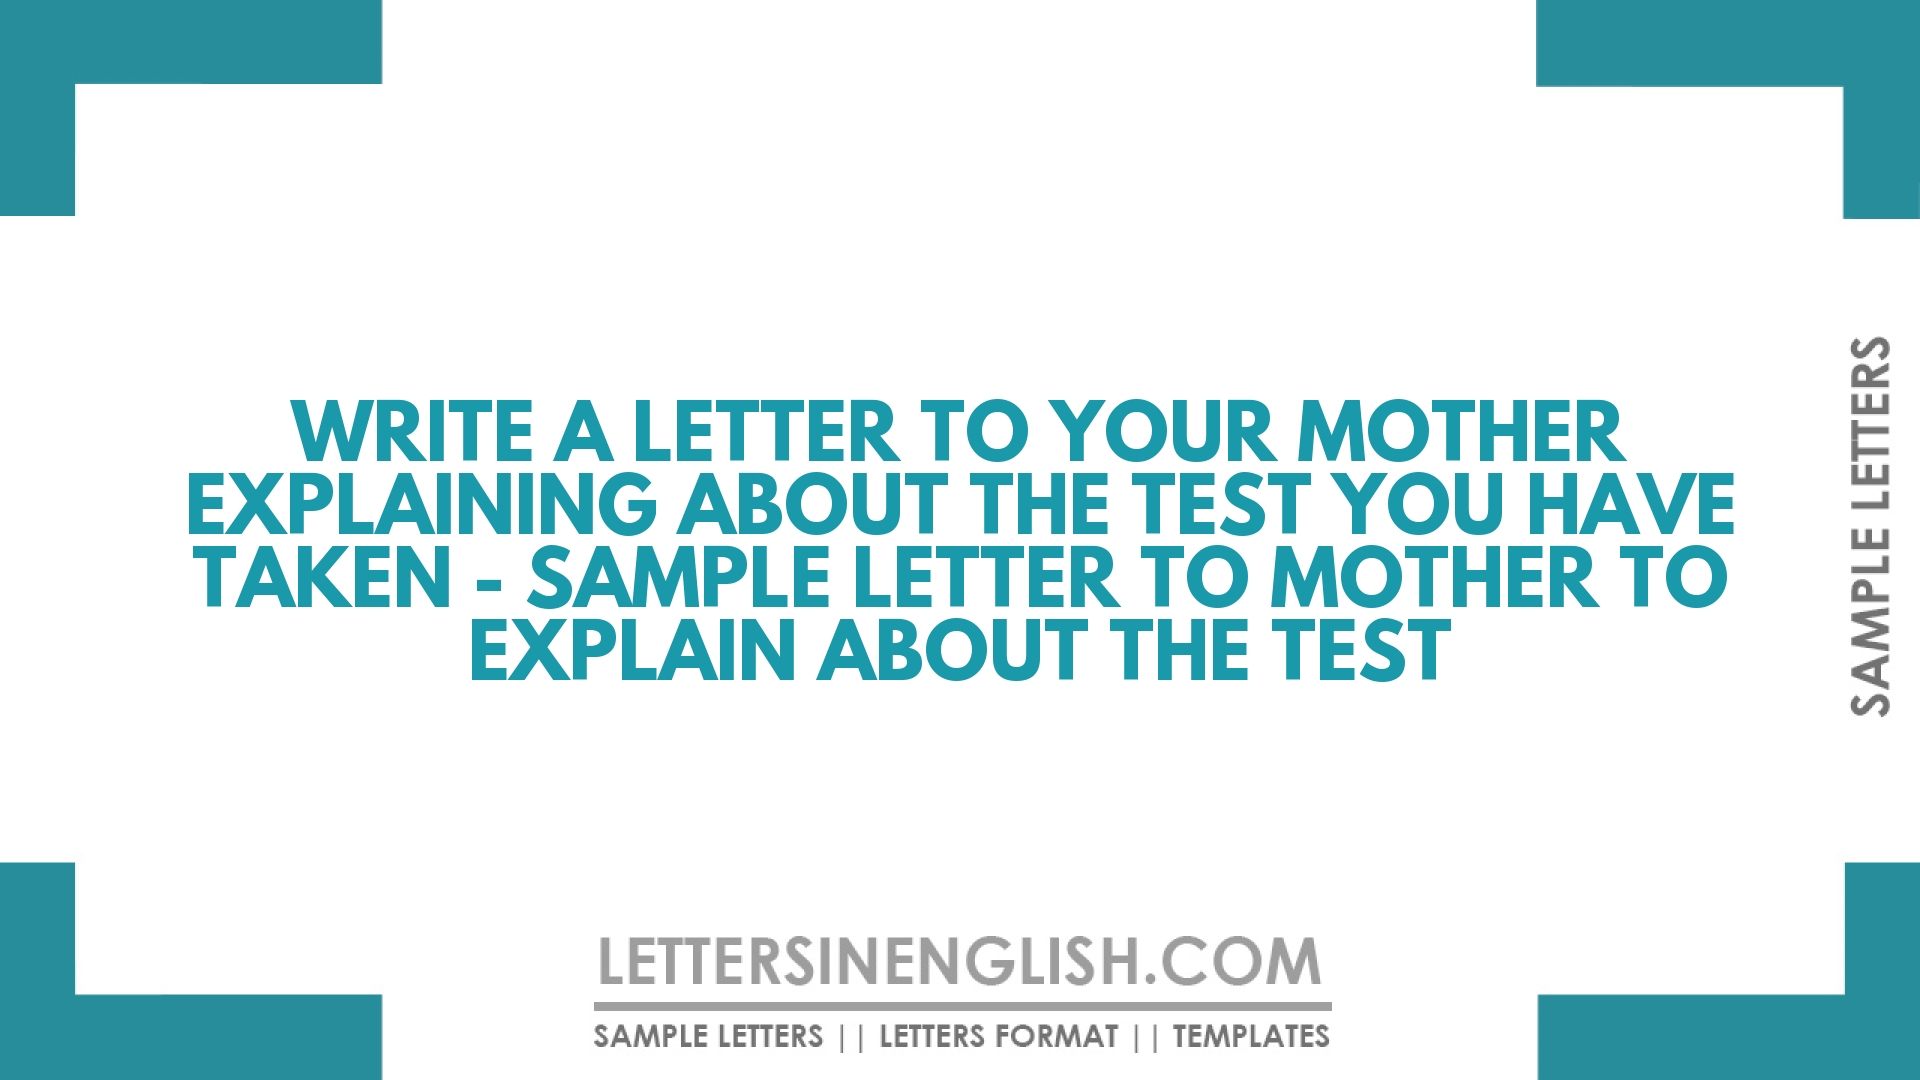 Write a letter to Your Mother Explaining About the Test You Have Taken – Sample Letter to Mother to Explain About the Test